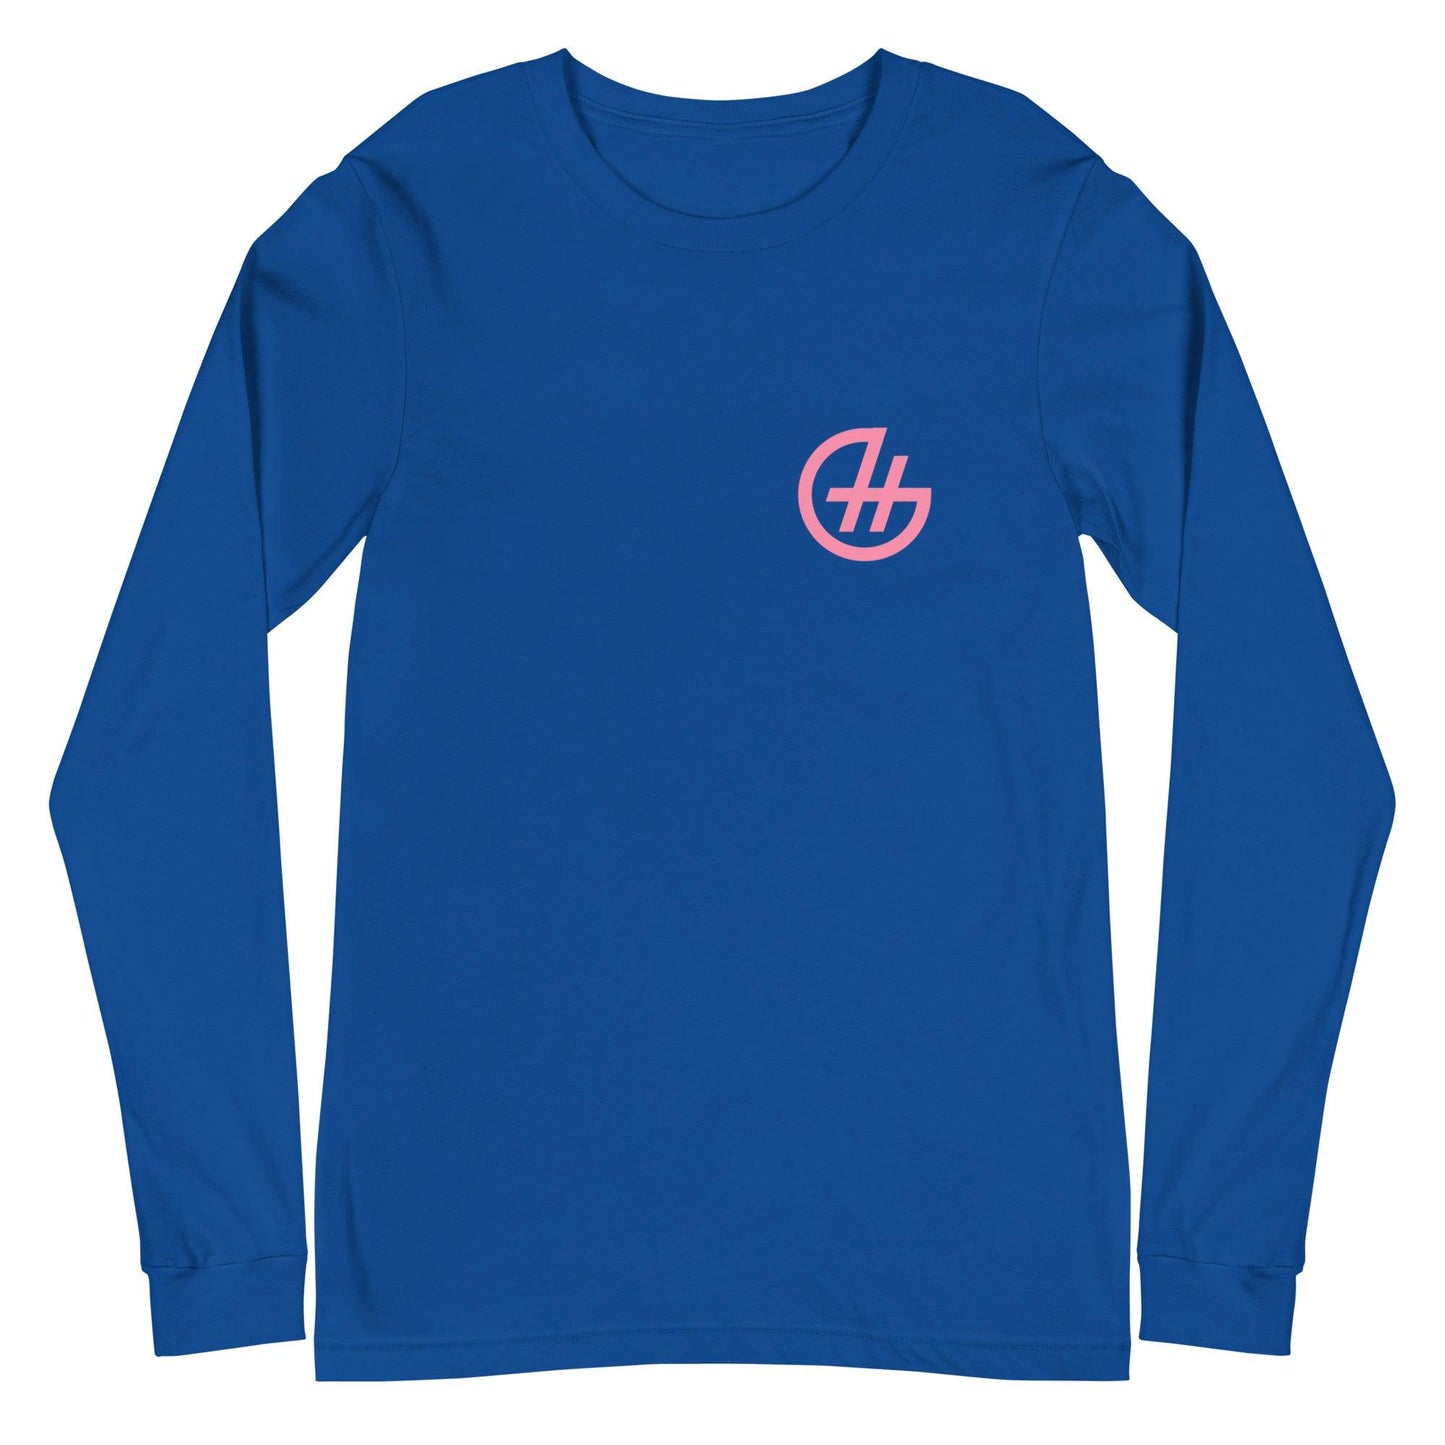 Hannah Gusters "The Brand" Long Sleeve Tee - Fan Arch